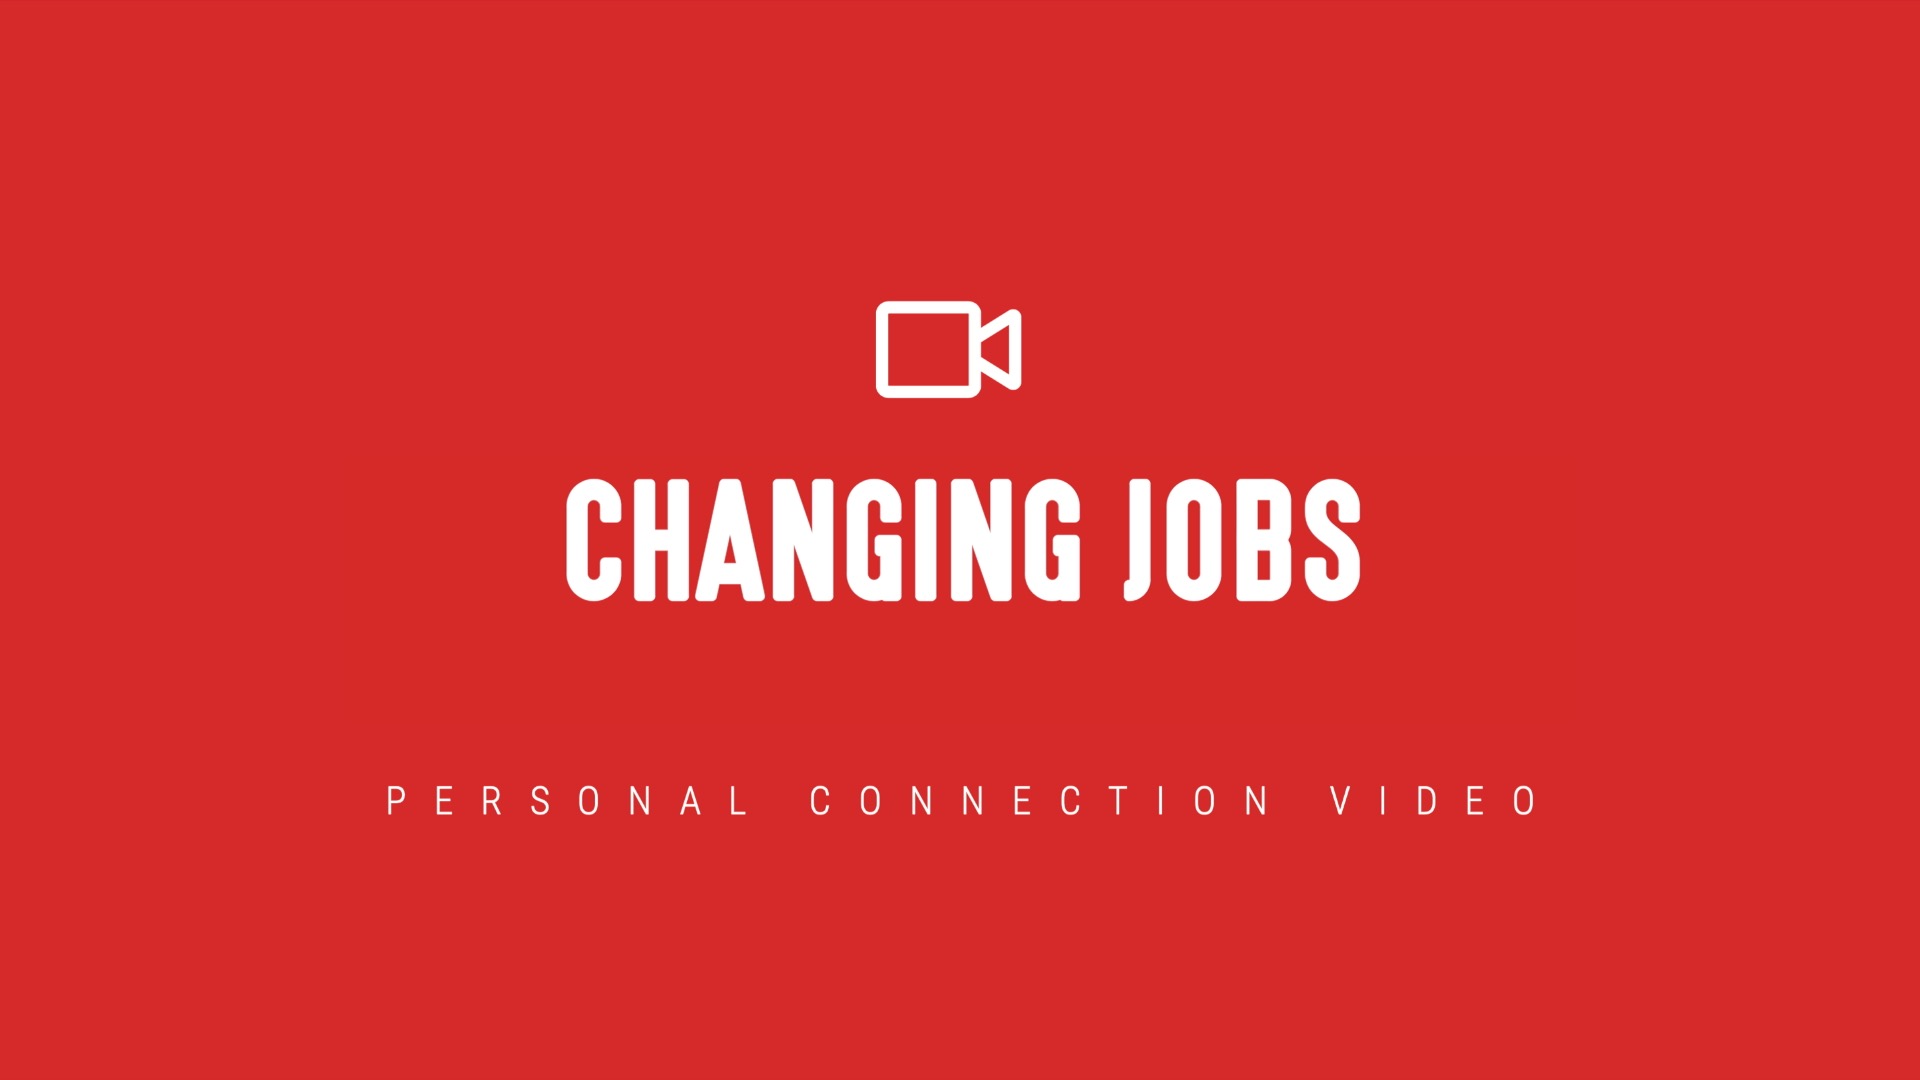 [NEW] Changing Jobs - Personal Connection Video